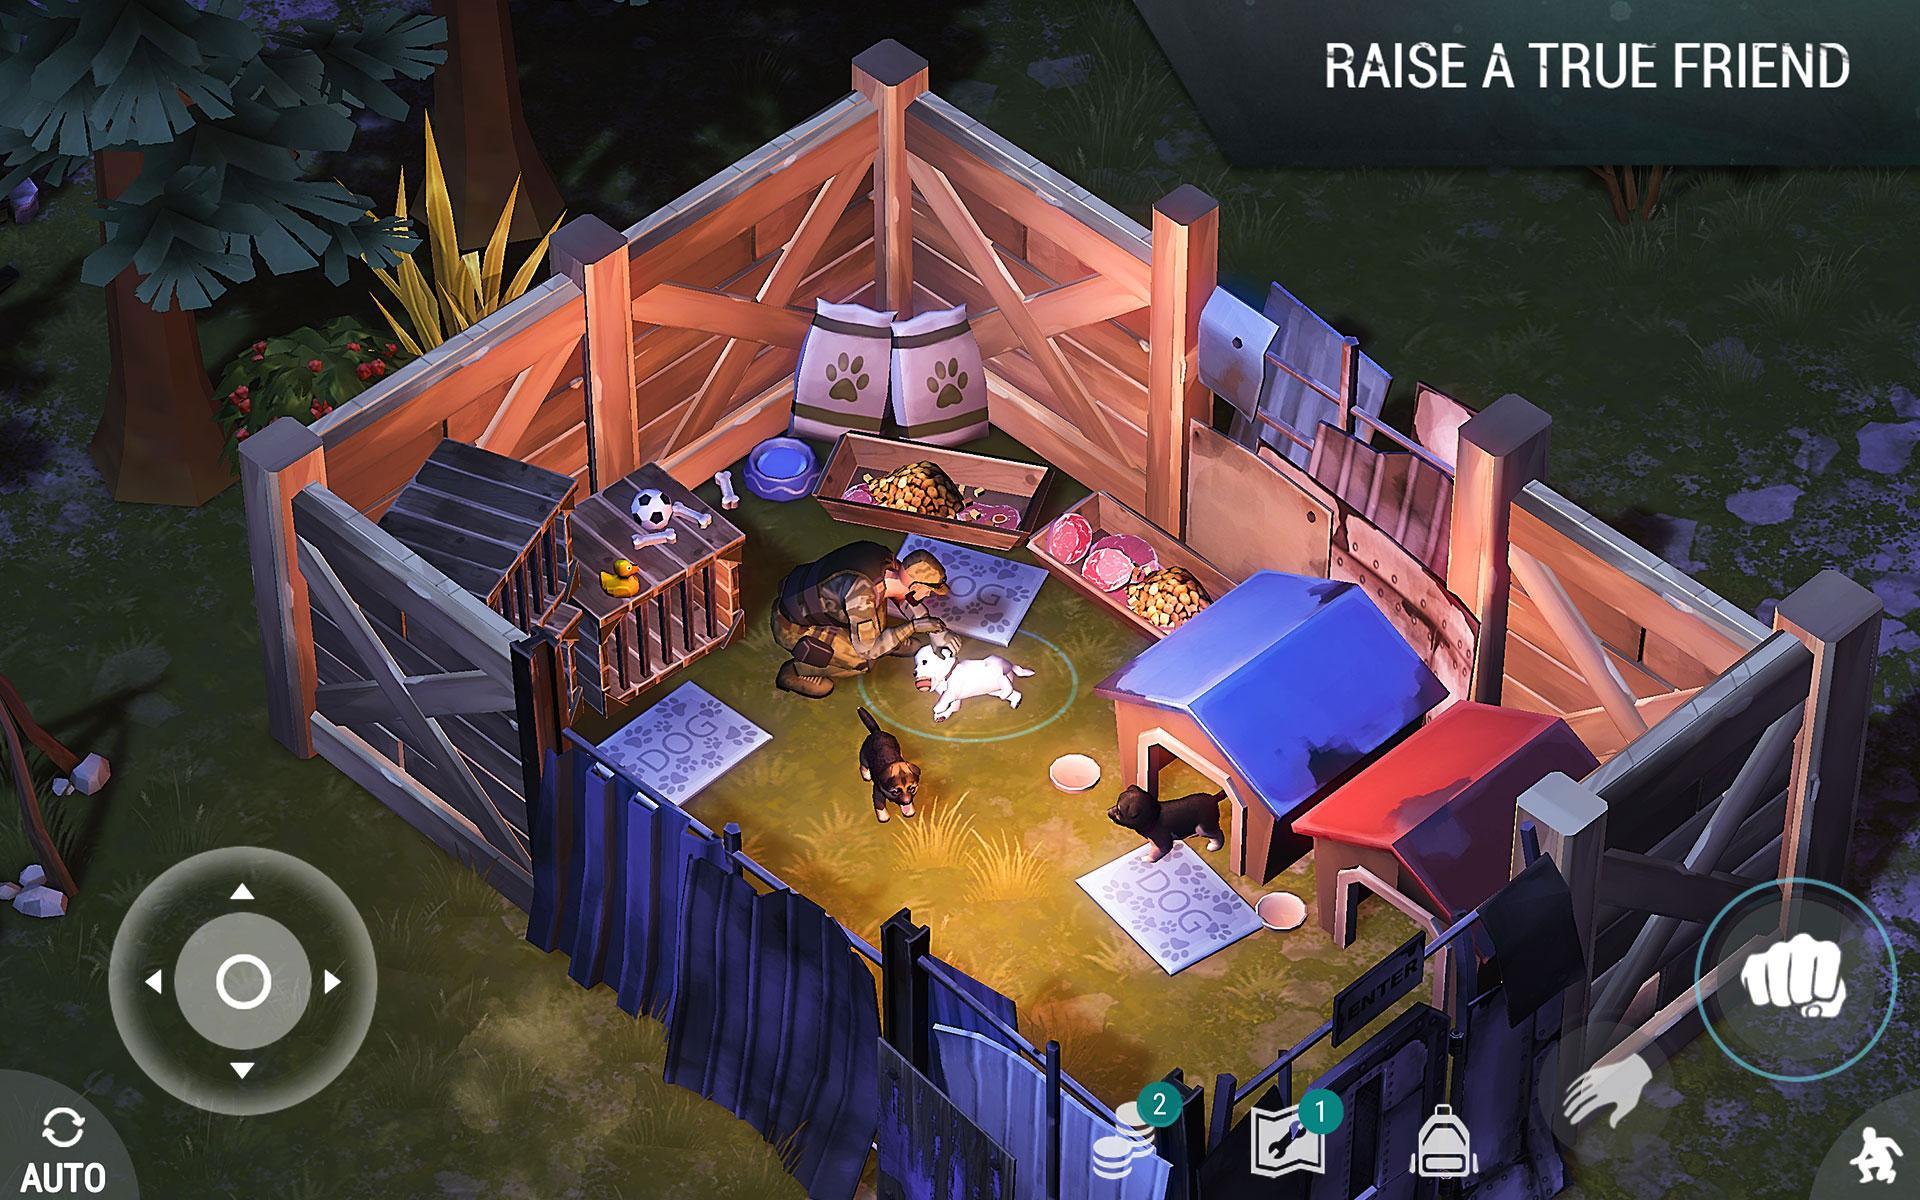 Last Day on Earth: Survival for Android - APK Download - 